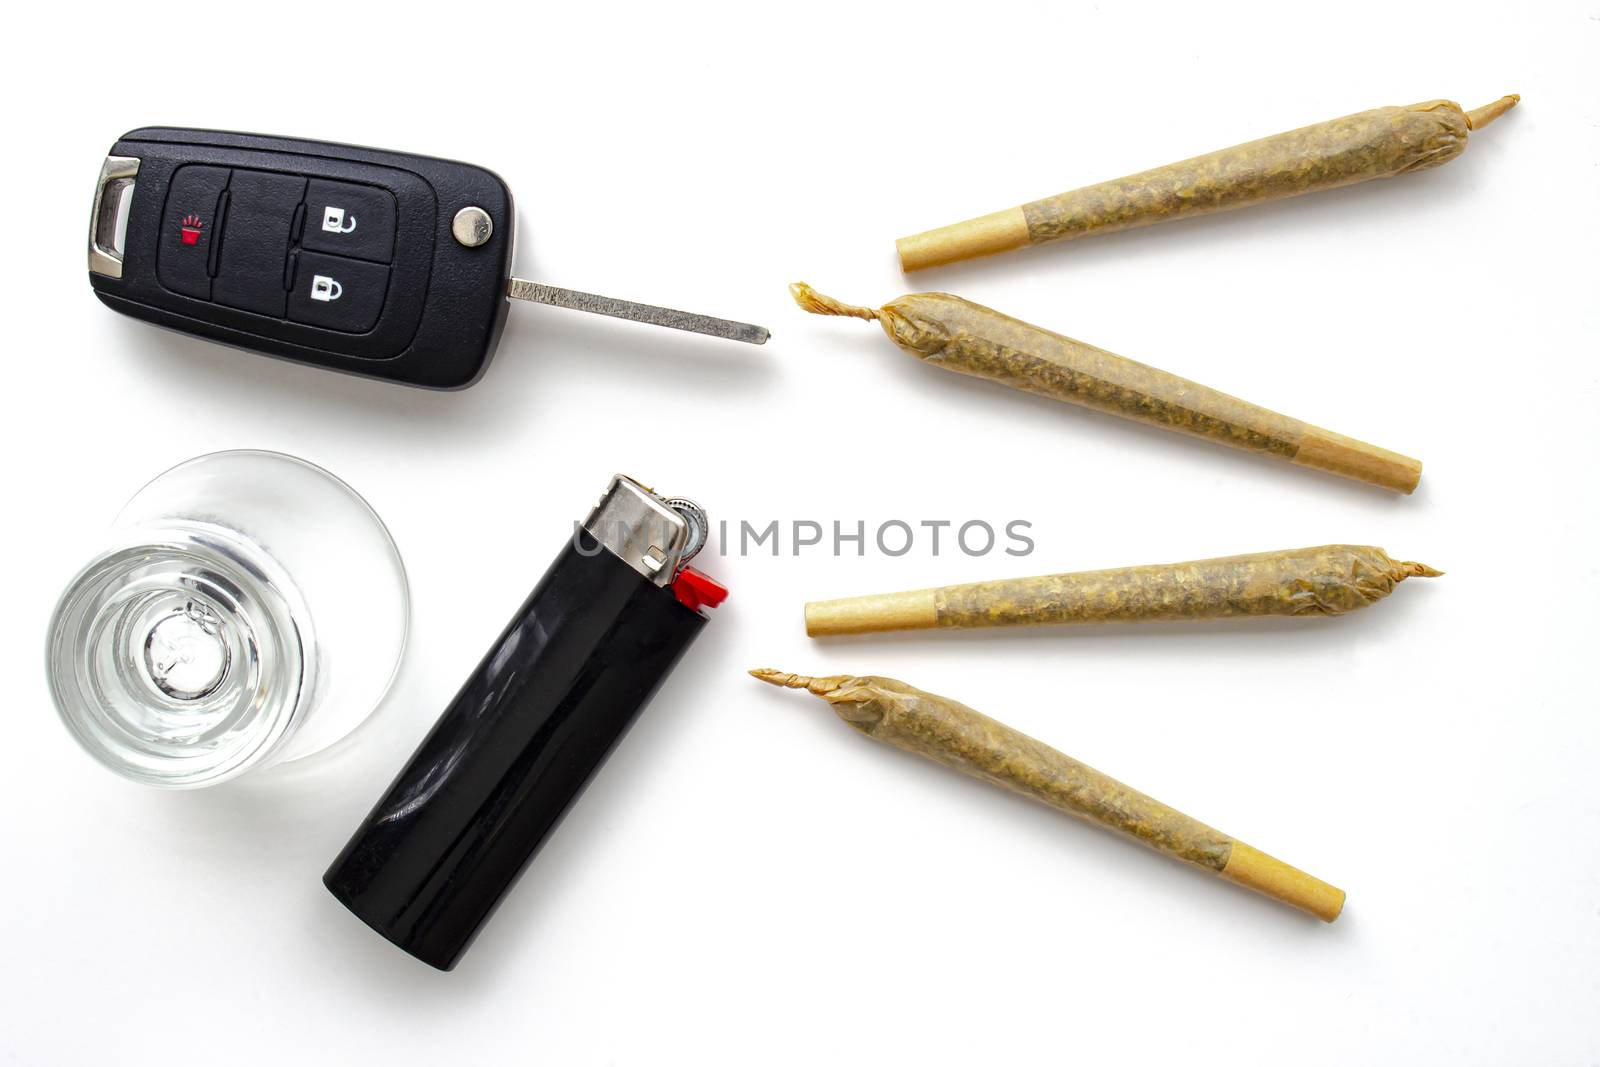 Cannabis Joints Cigarettes with car key, a shoot glass and a lighter on a white background. Concept driving high. Drug-impaired driving is dangerous and against the law by oasisamuel